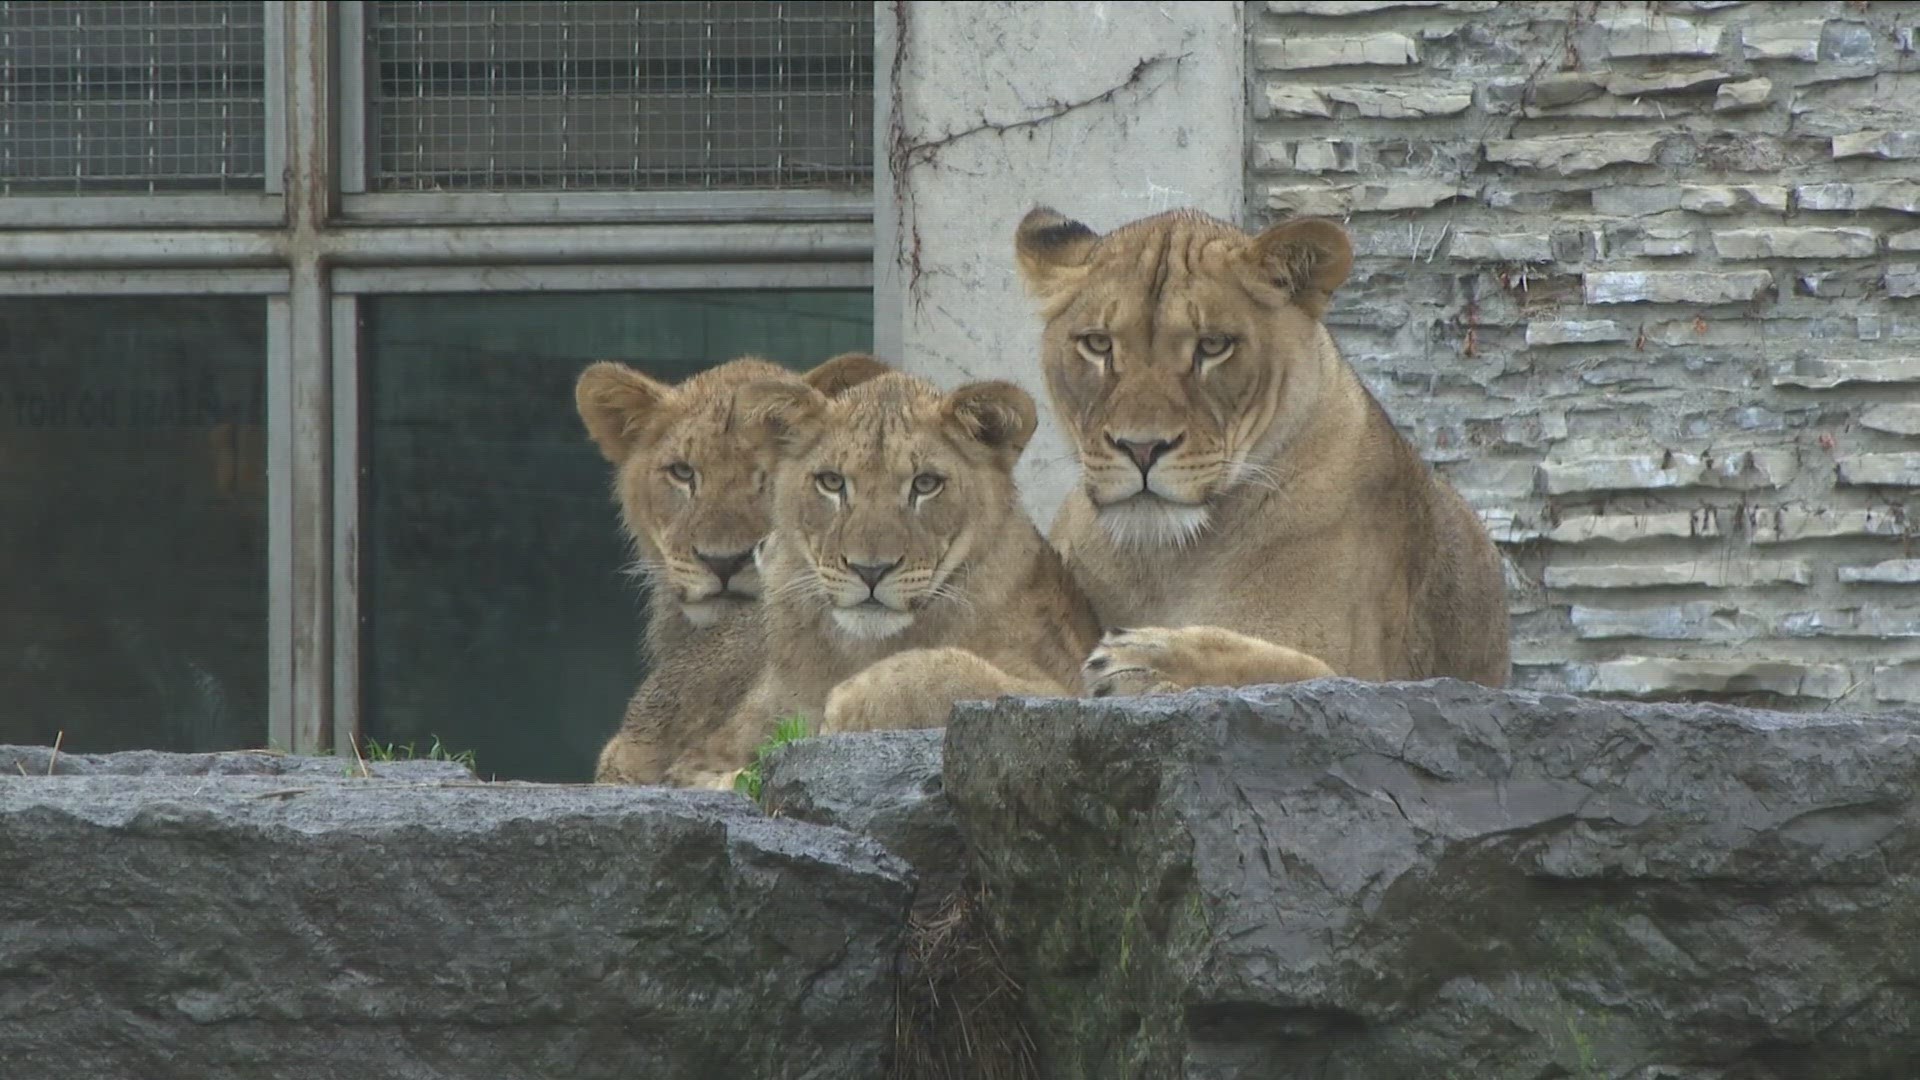 The Buffalo Zoo will be offering a new program giving guests cheaper admission.